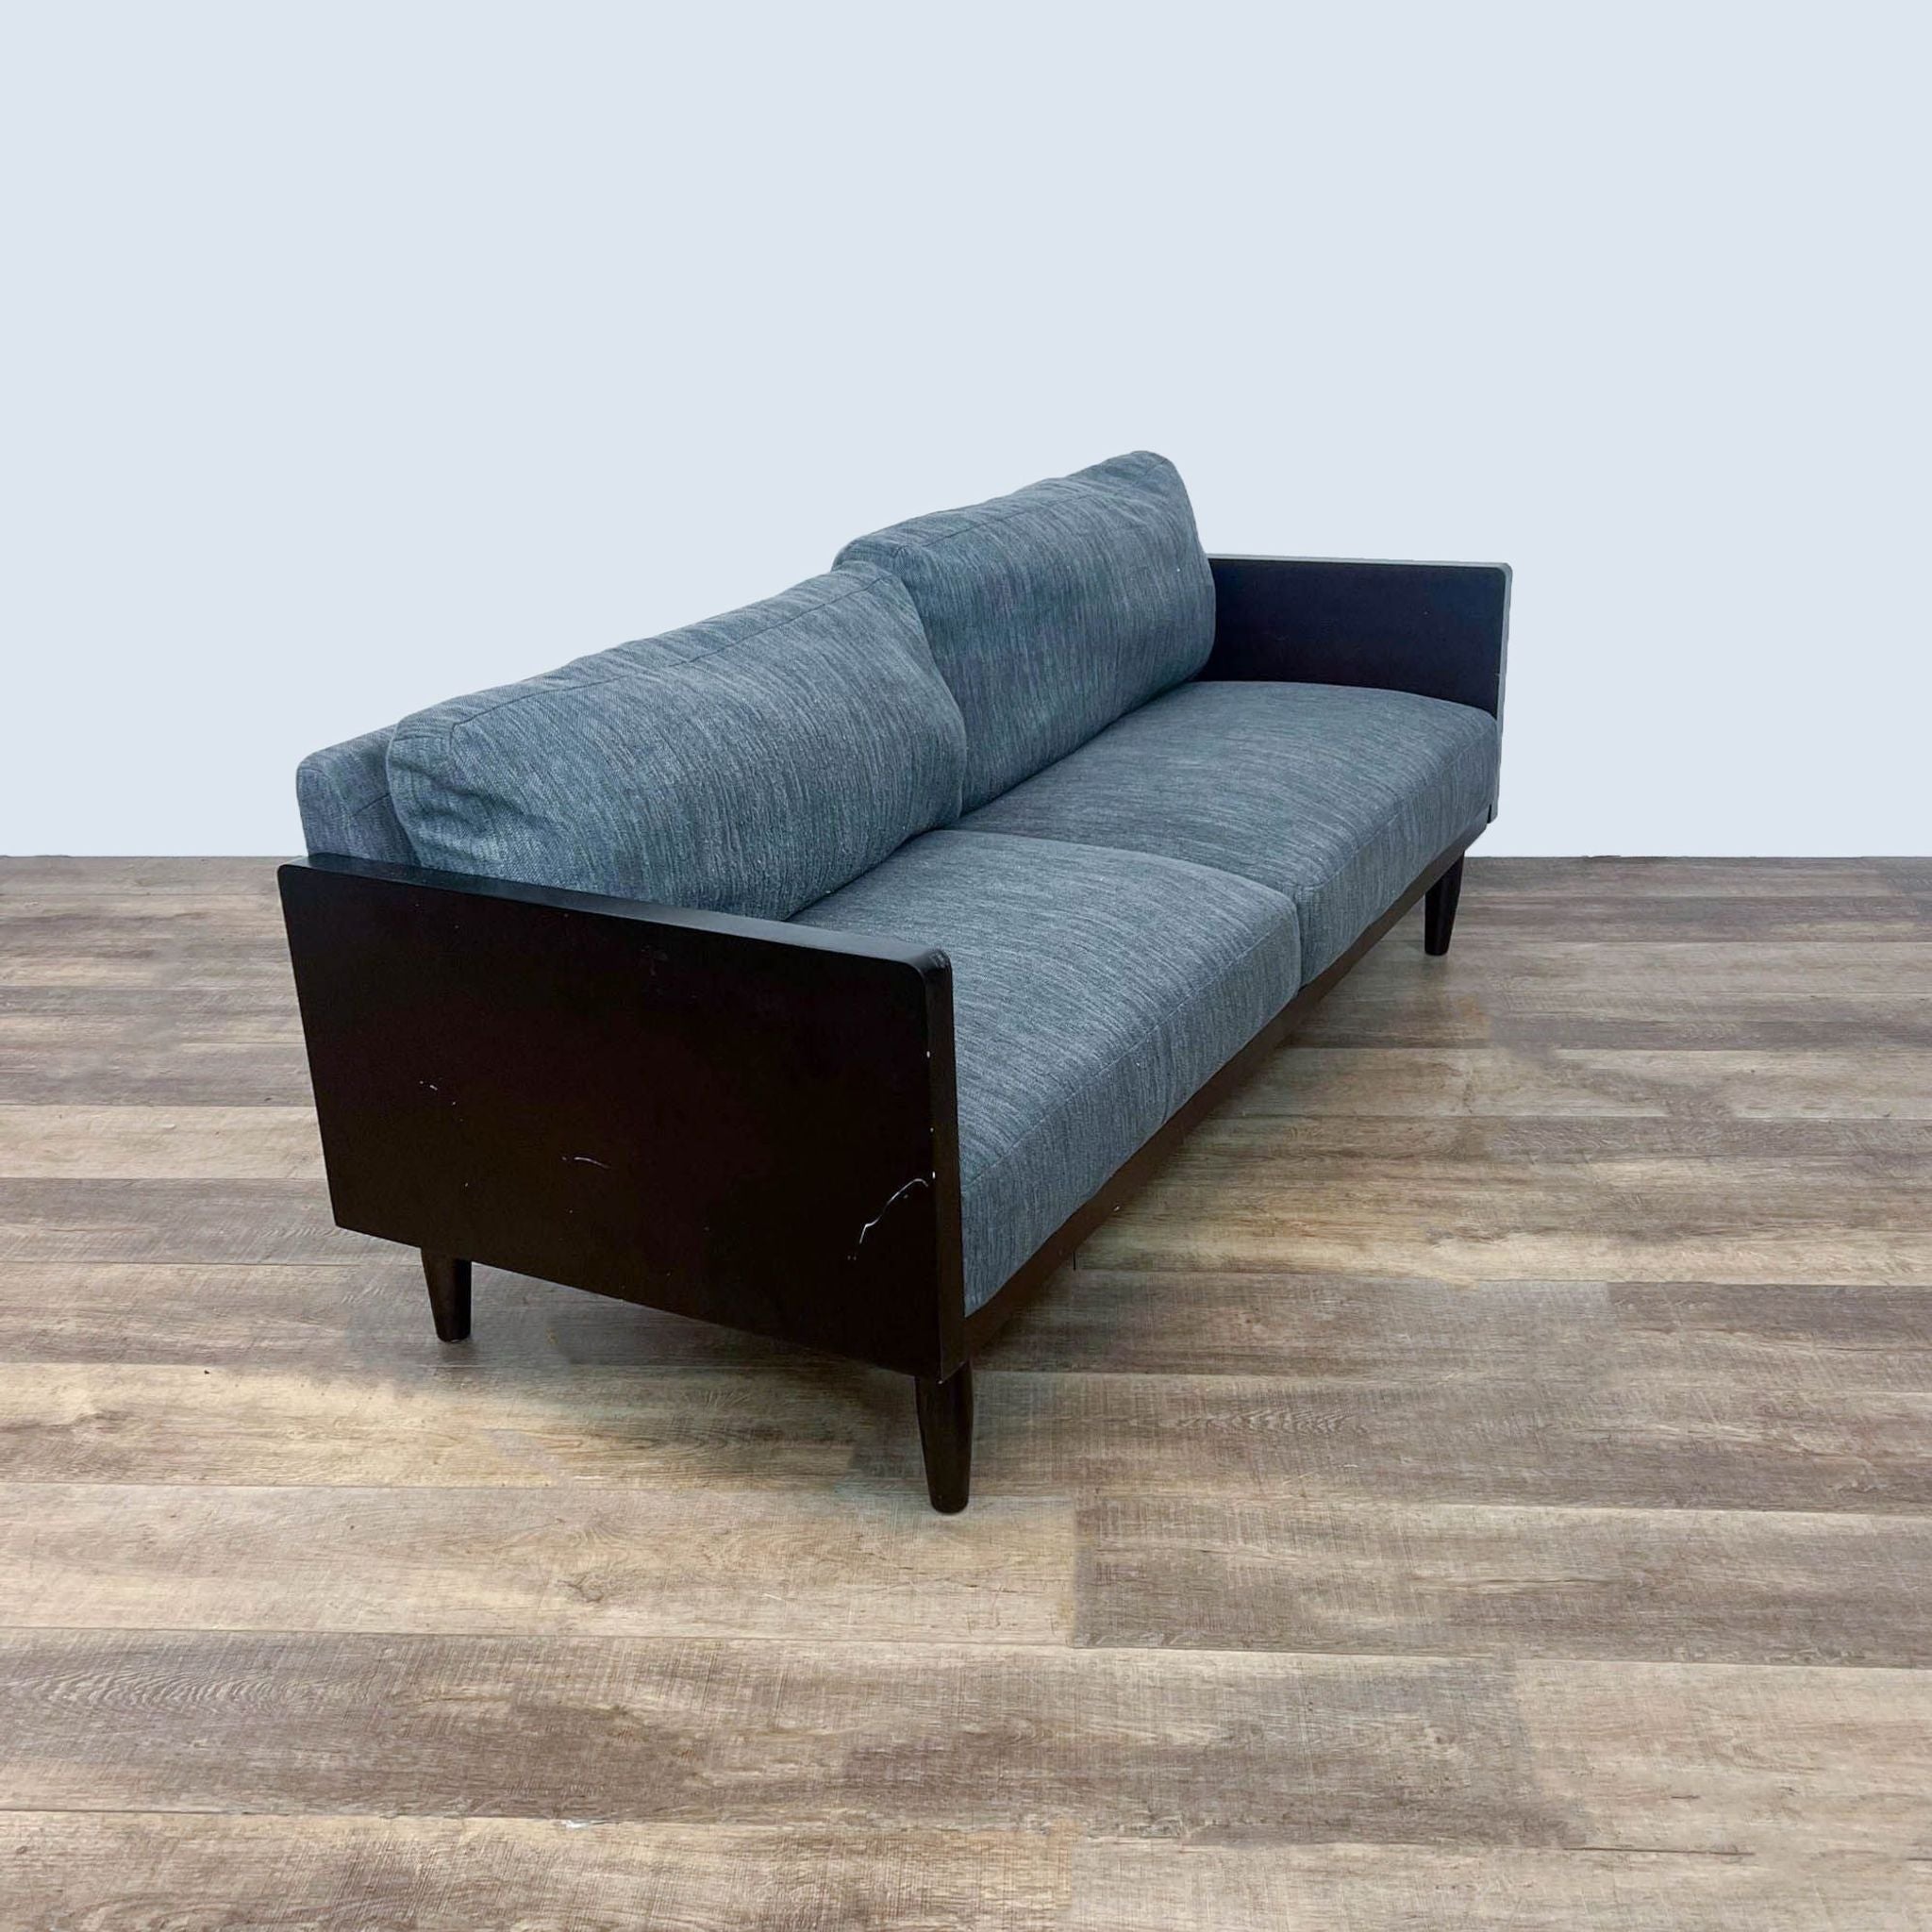 Angle view of a Noble Home loveseat in gray fabric with dark wood details, showcasing side and wooden legs.